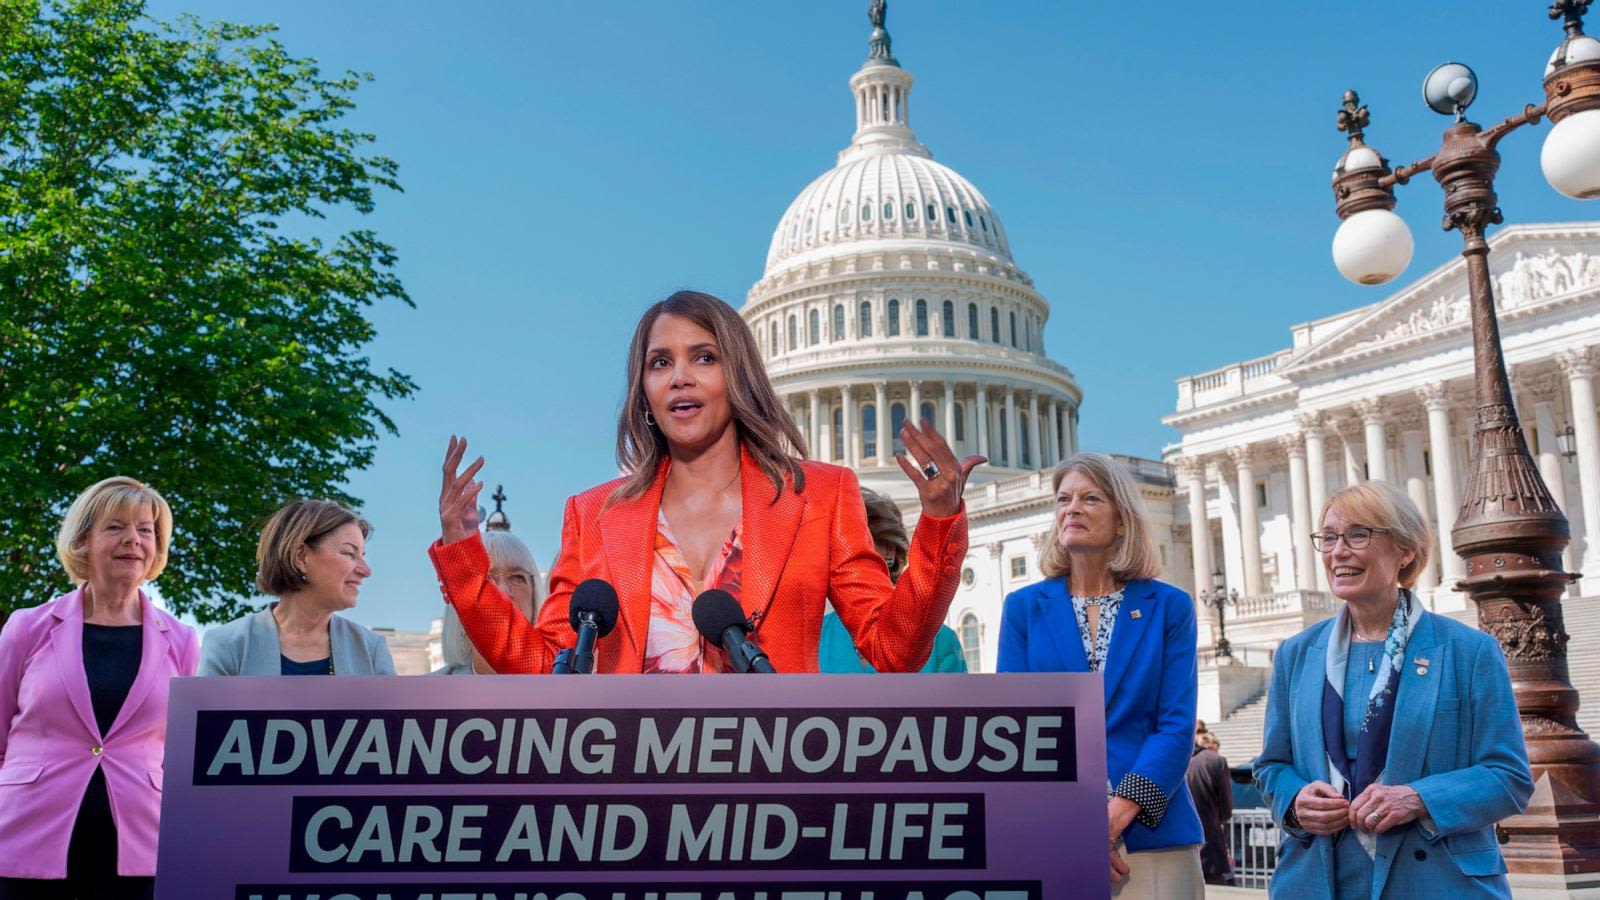 Halle Berry shouts 'I'm in menopause' on Capitol Hill as she fights for funding to improve women's care